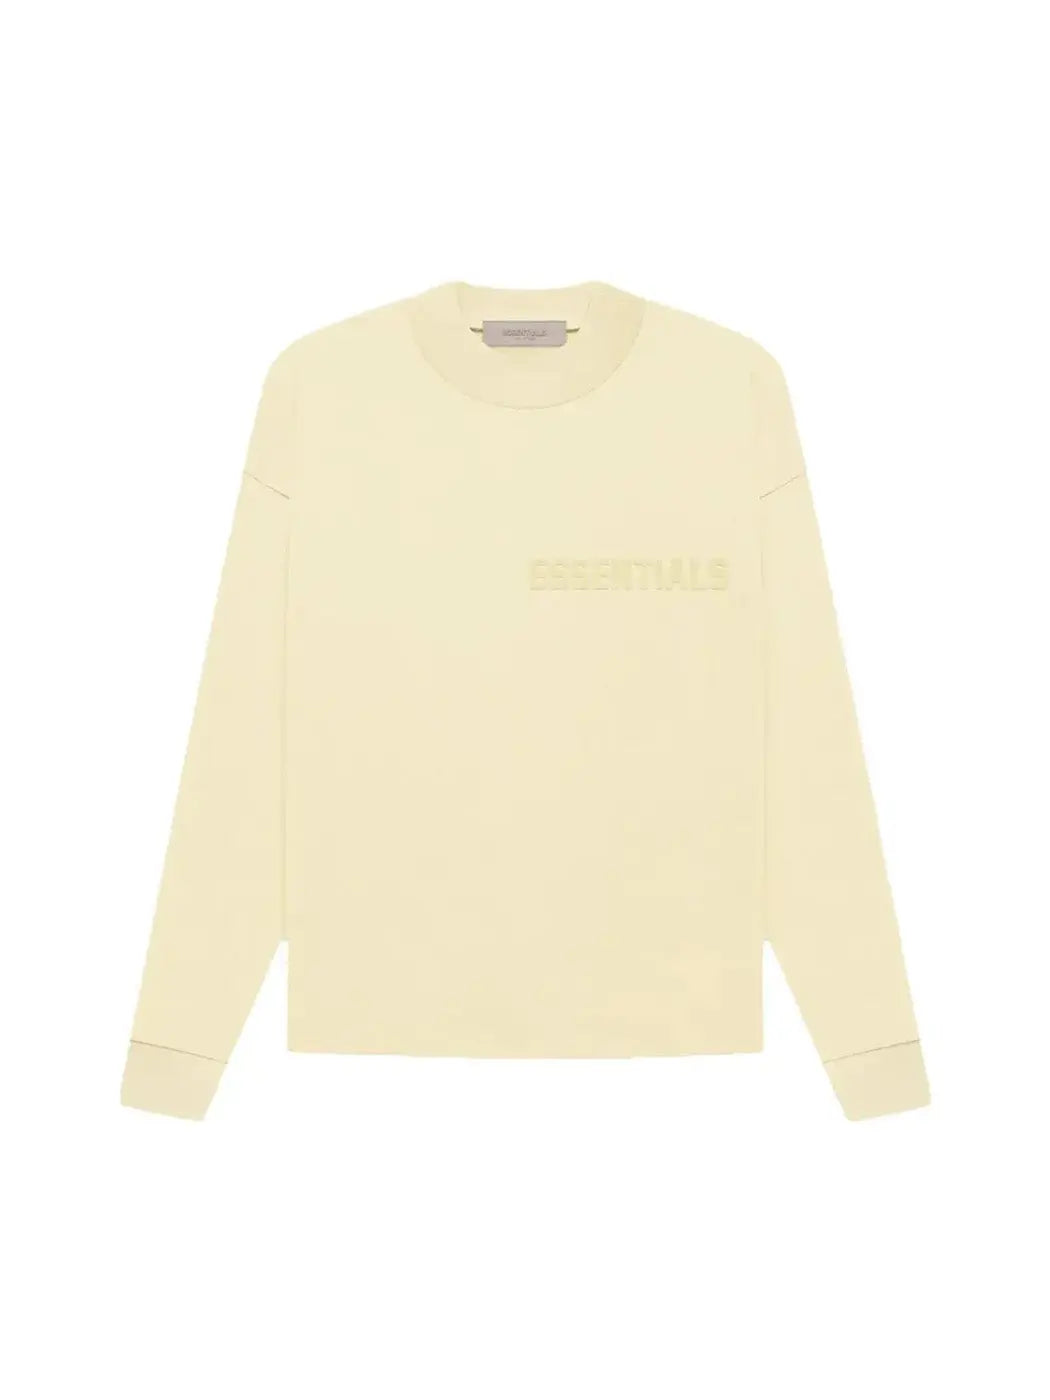 Fear of God Essentials L/S T-shirt Canary in Auckland, New Zealand - Shop name